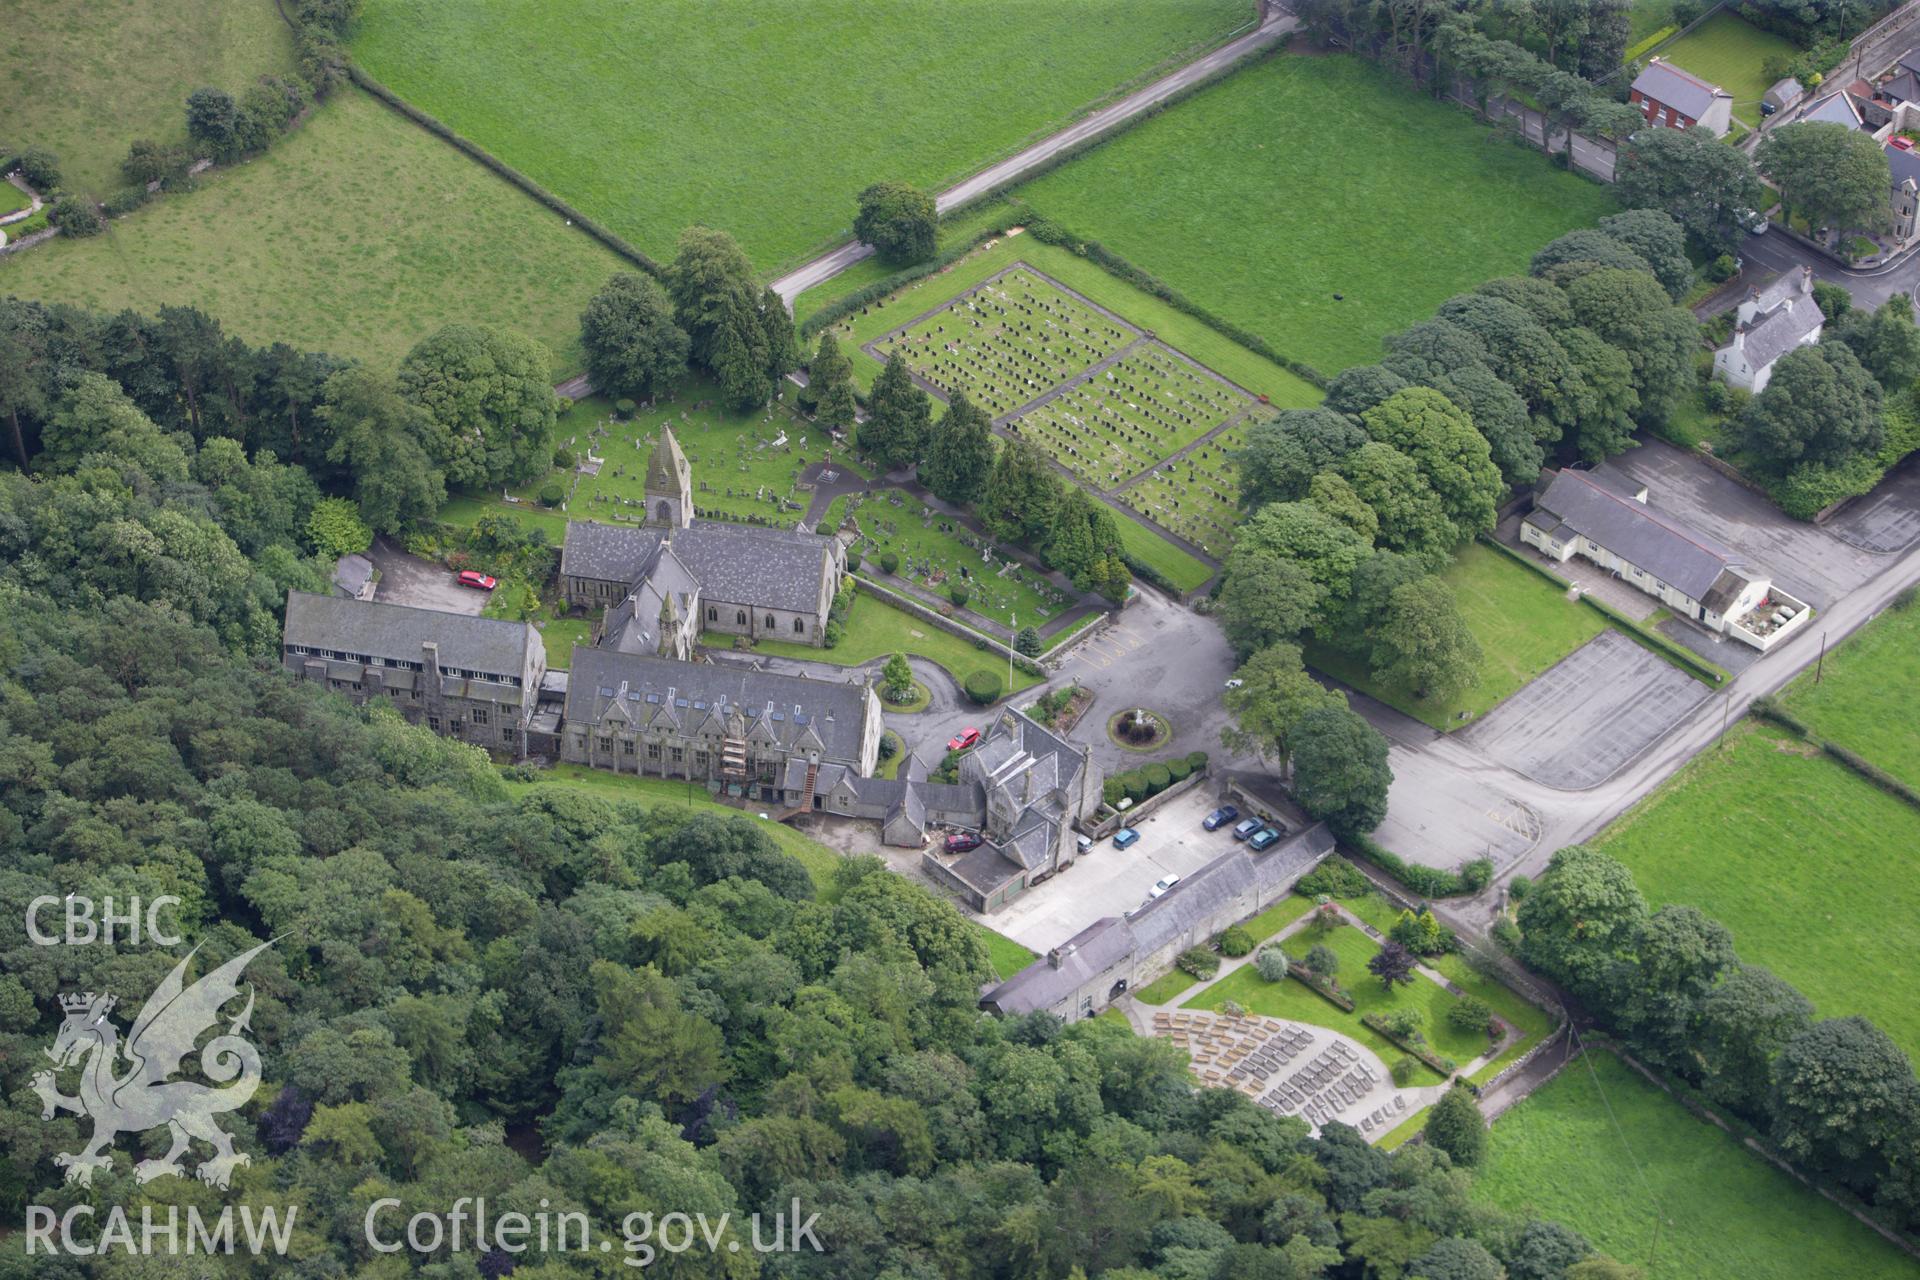 RCAHMW colour oblique aerial photograph of St David's Church, Pantasaph. Taken on 30 July 2009 by Toby Driver